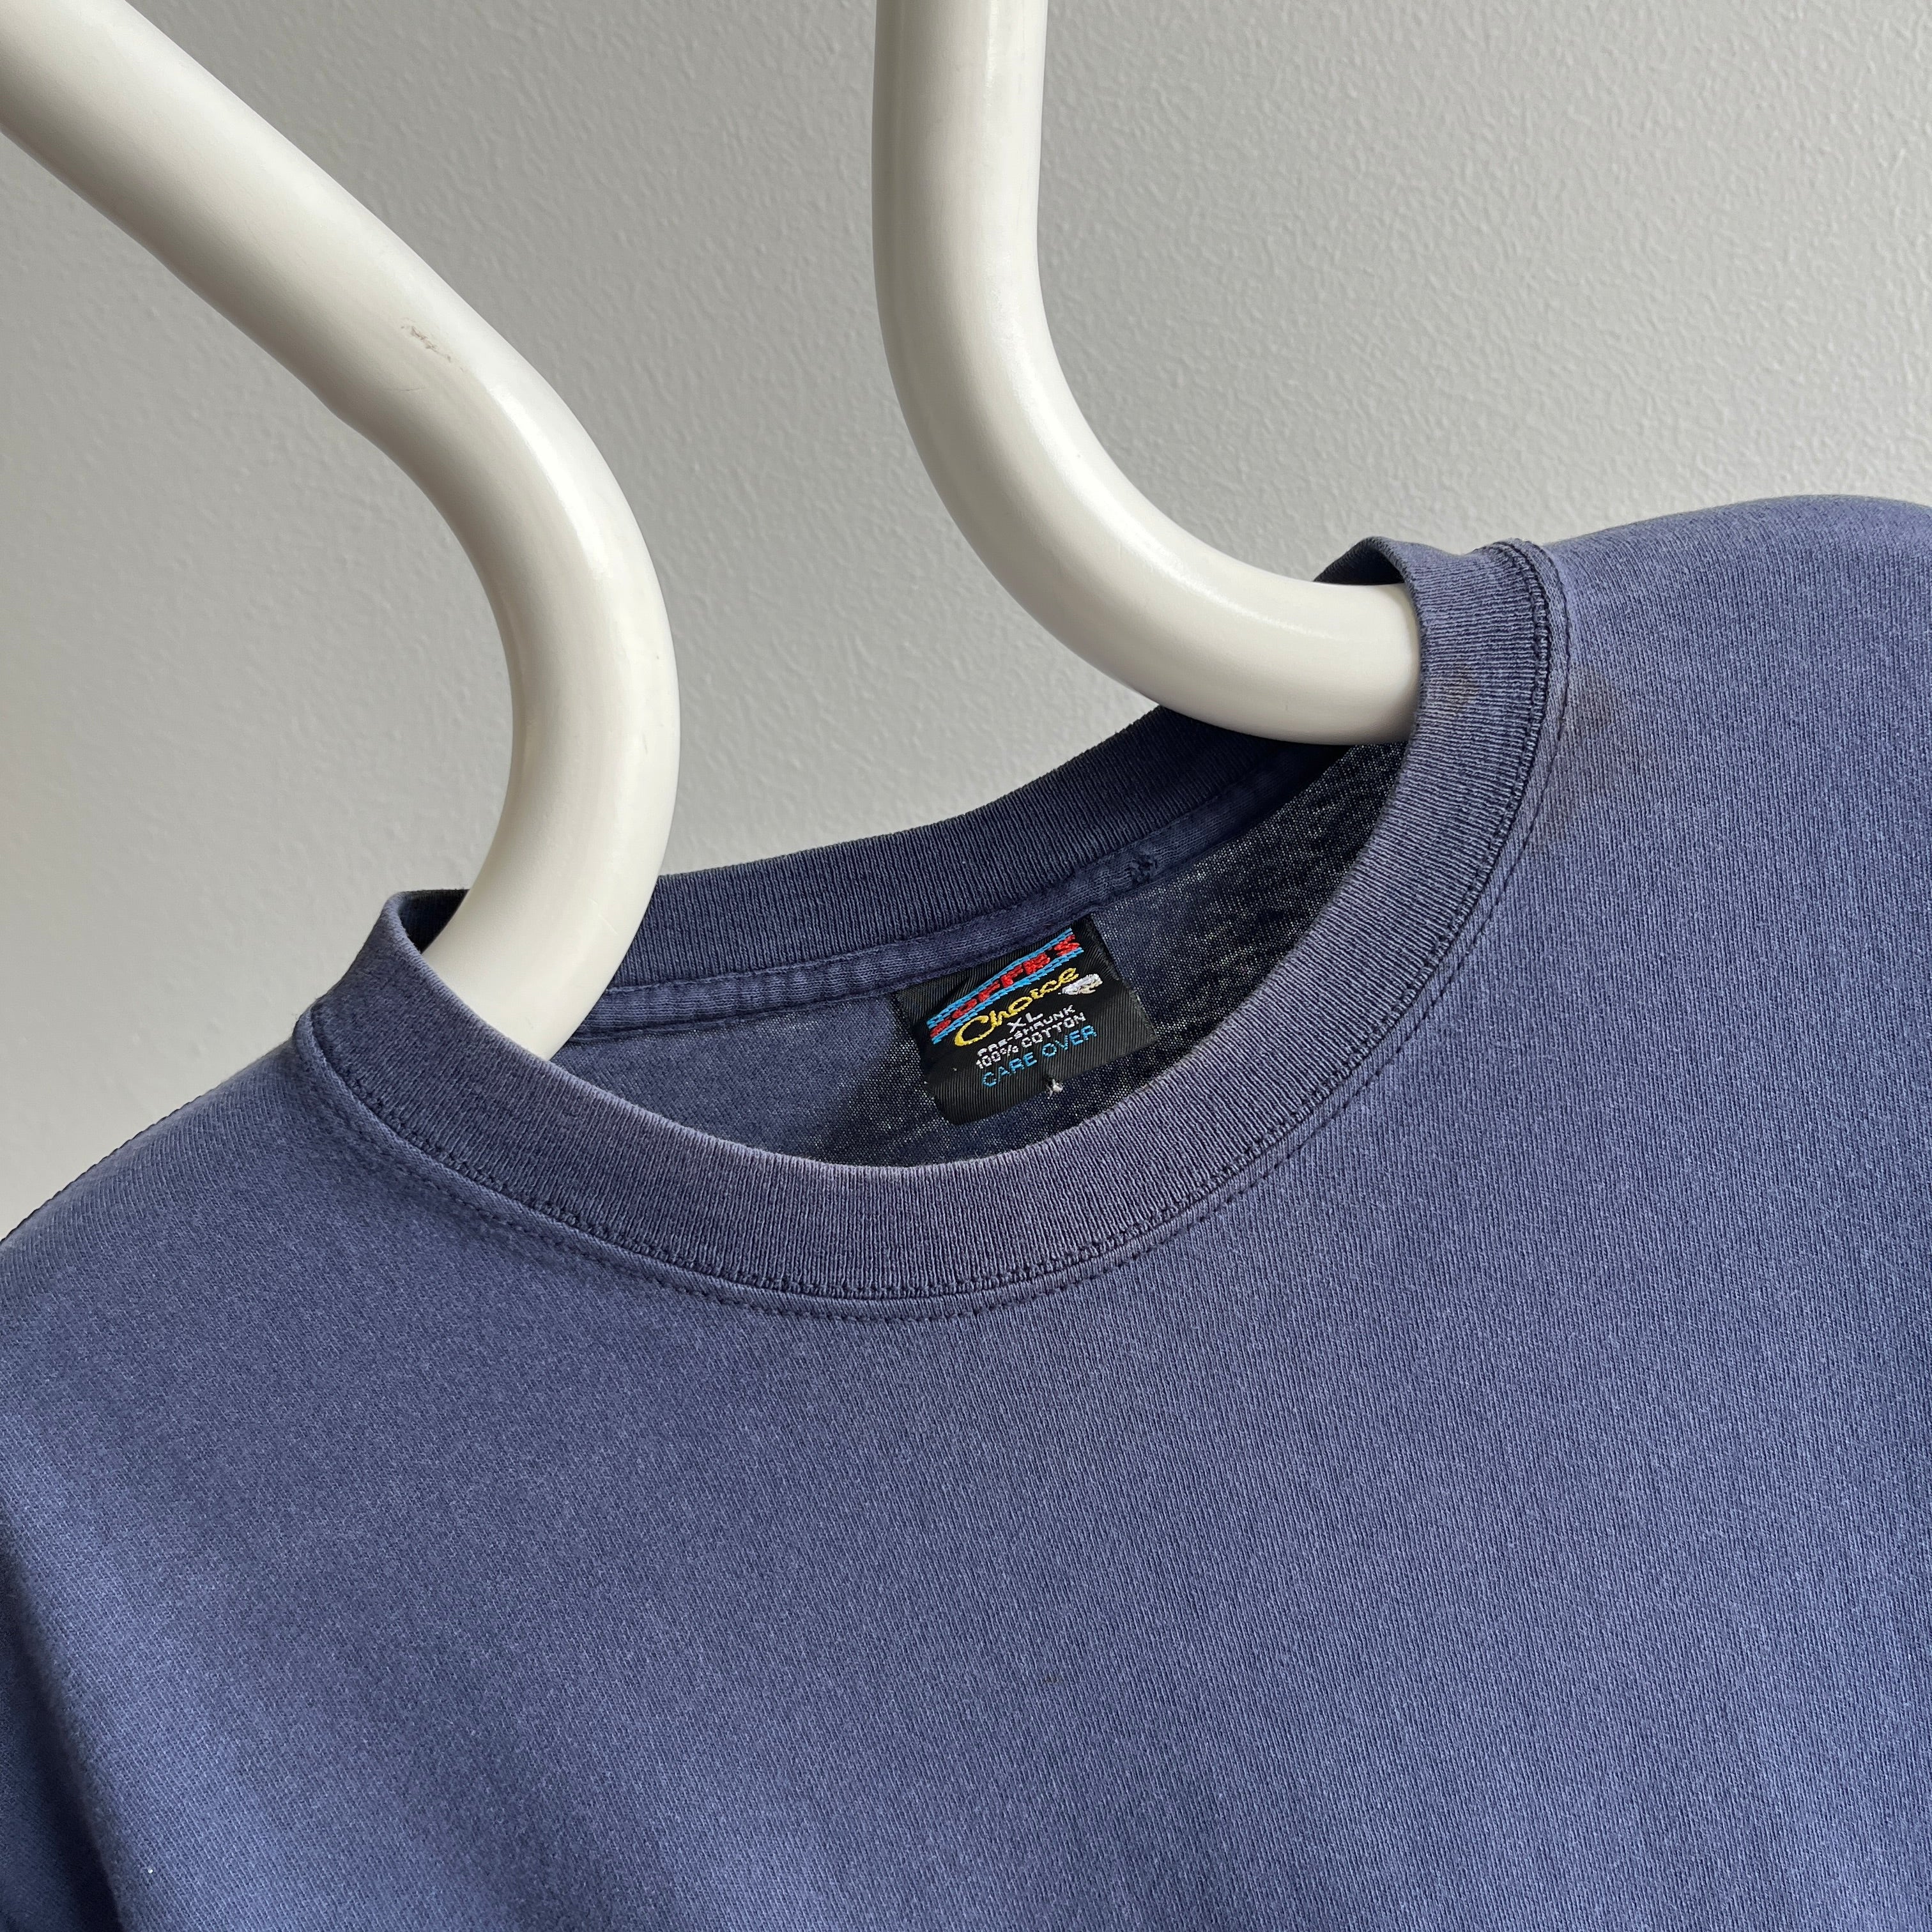 1980s Faded Navy Cotton T-Shirt with Some Graphic Fade on the Backside